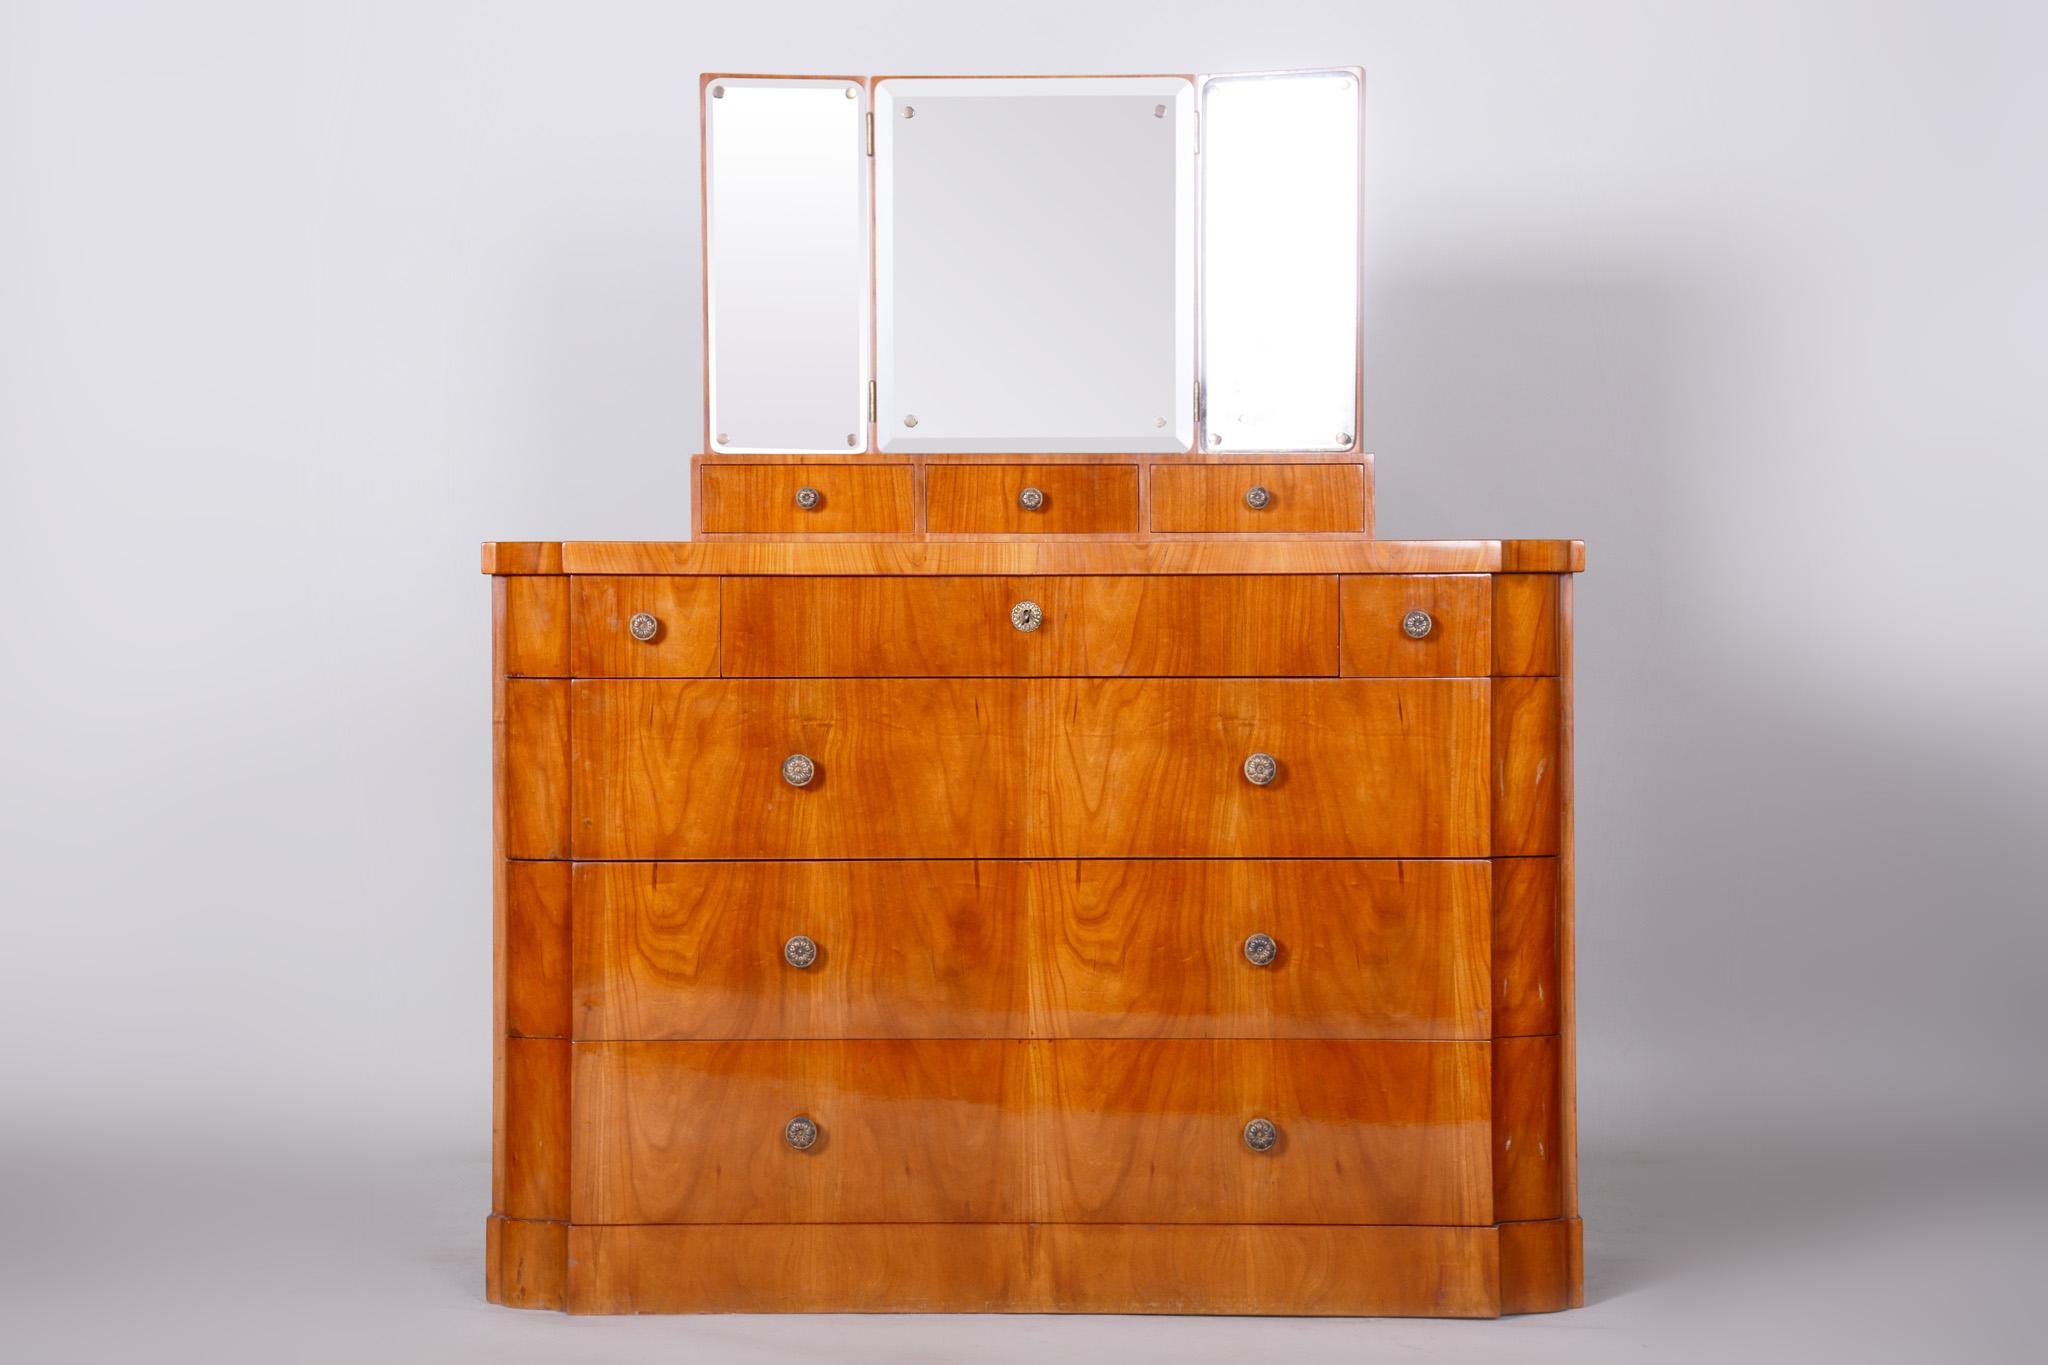 Unique Czech Art Deco Dressing Table with Mirror, Cherry-Tree, Restored, 1920s For Sale 5